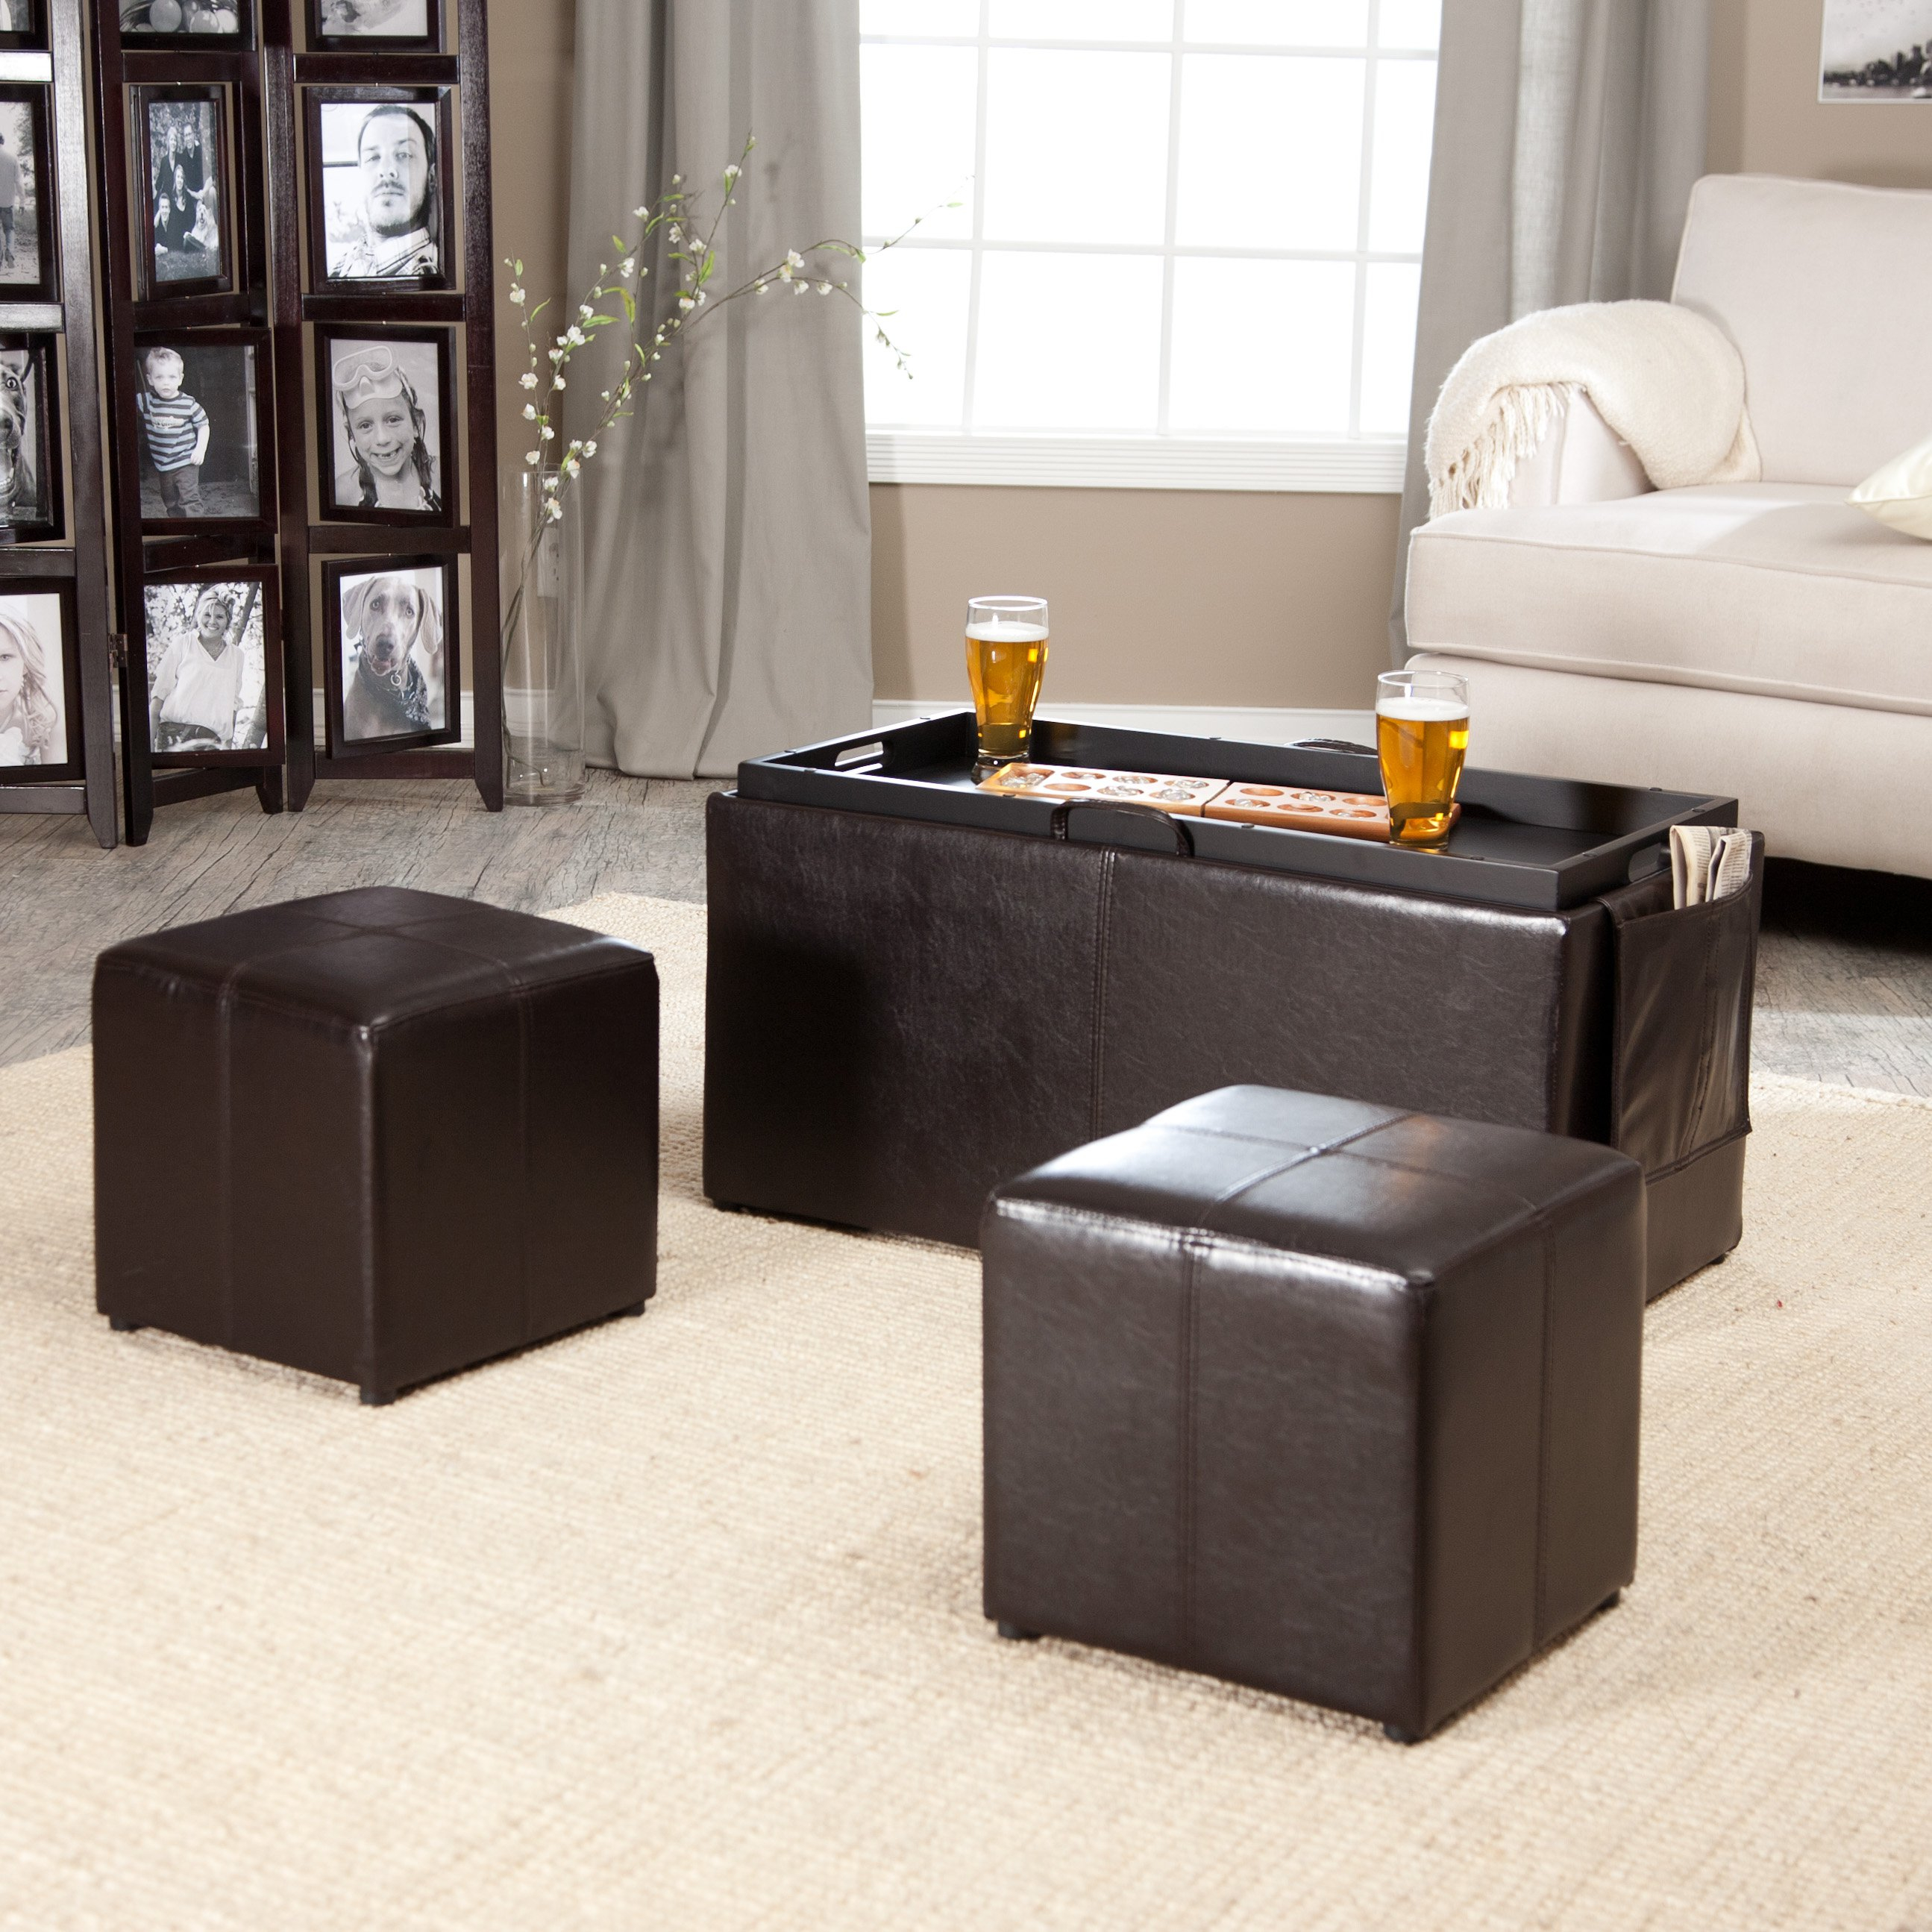 Simpli Home Avalon Coffee Table Storage Ottoman With 4 Serving Trays with size 2590 X 2590